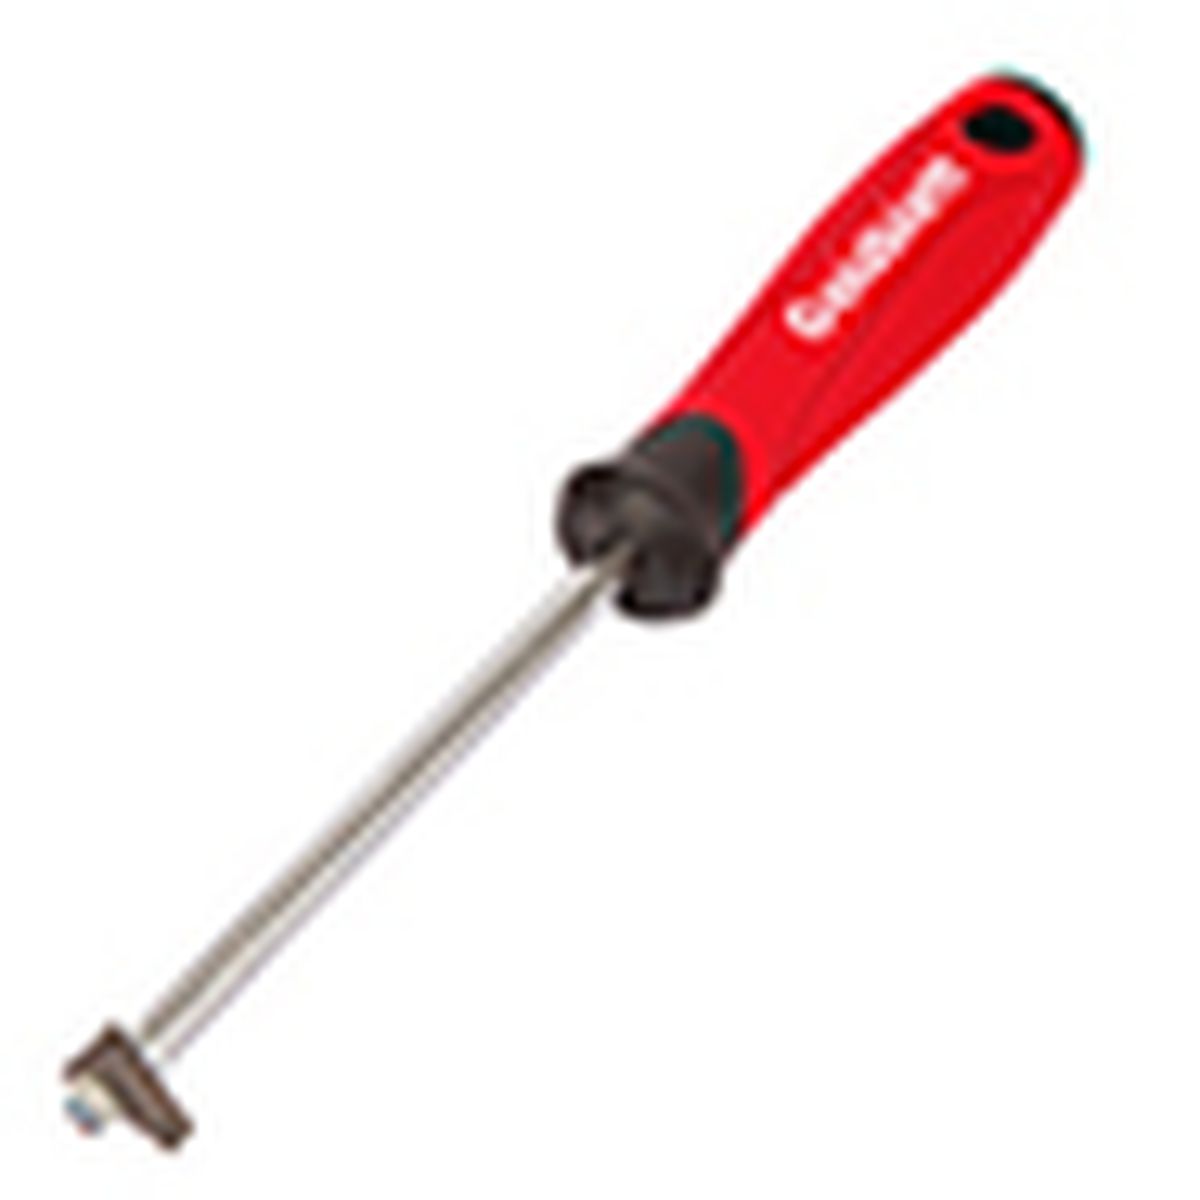 grout removal tool with carbide blade